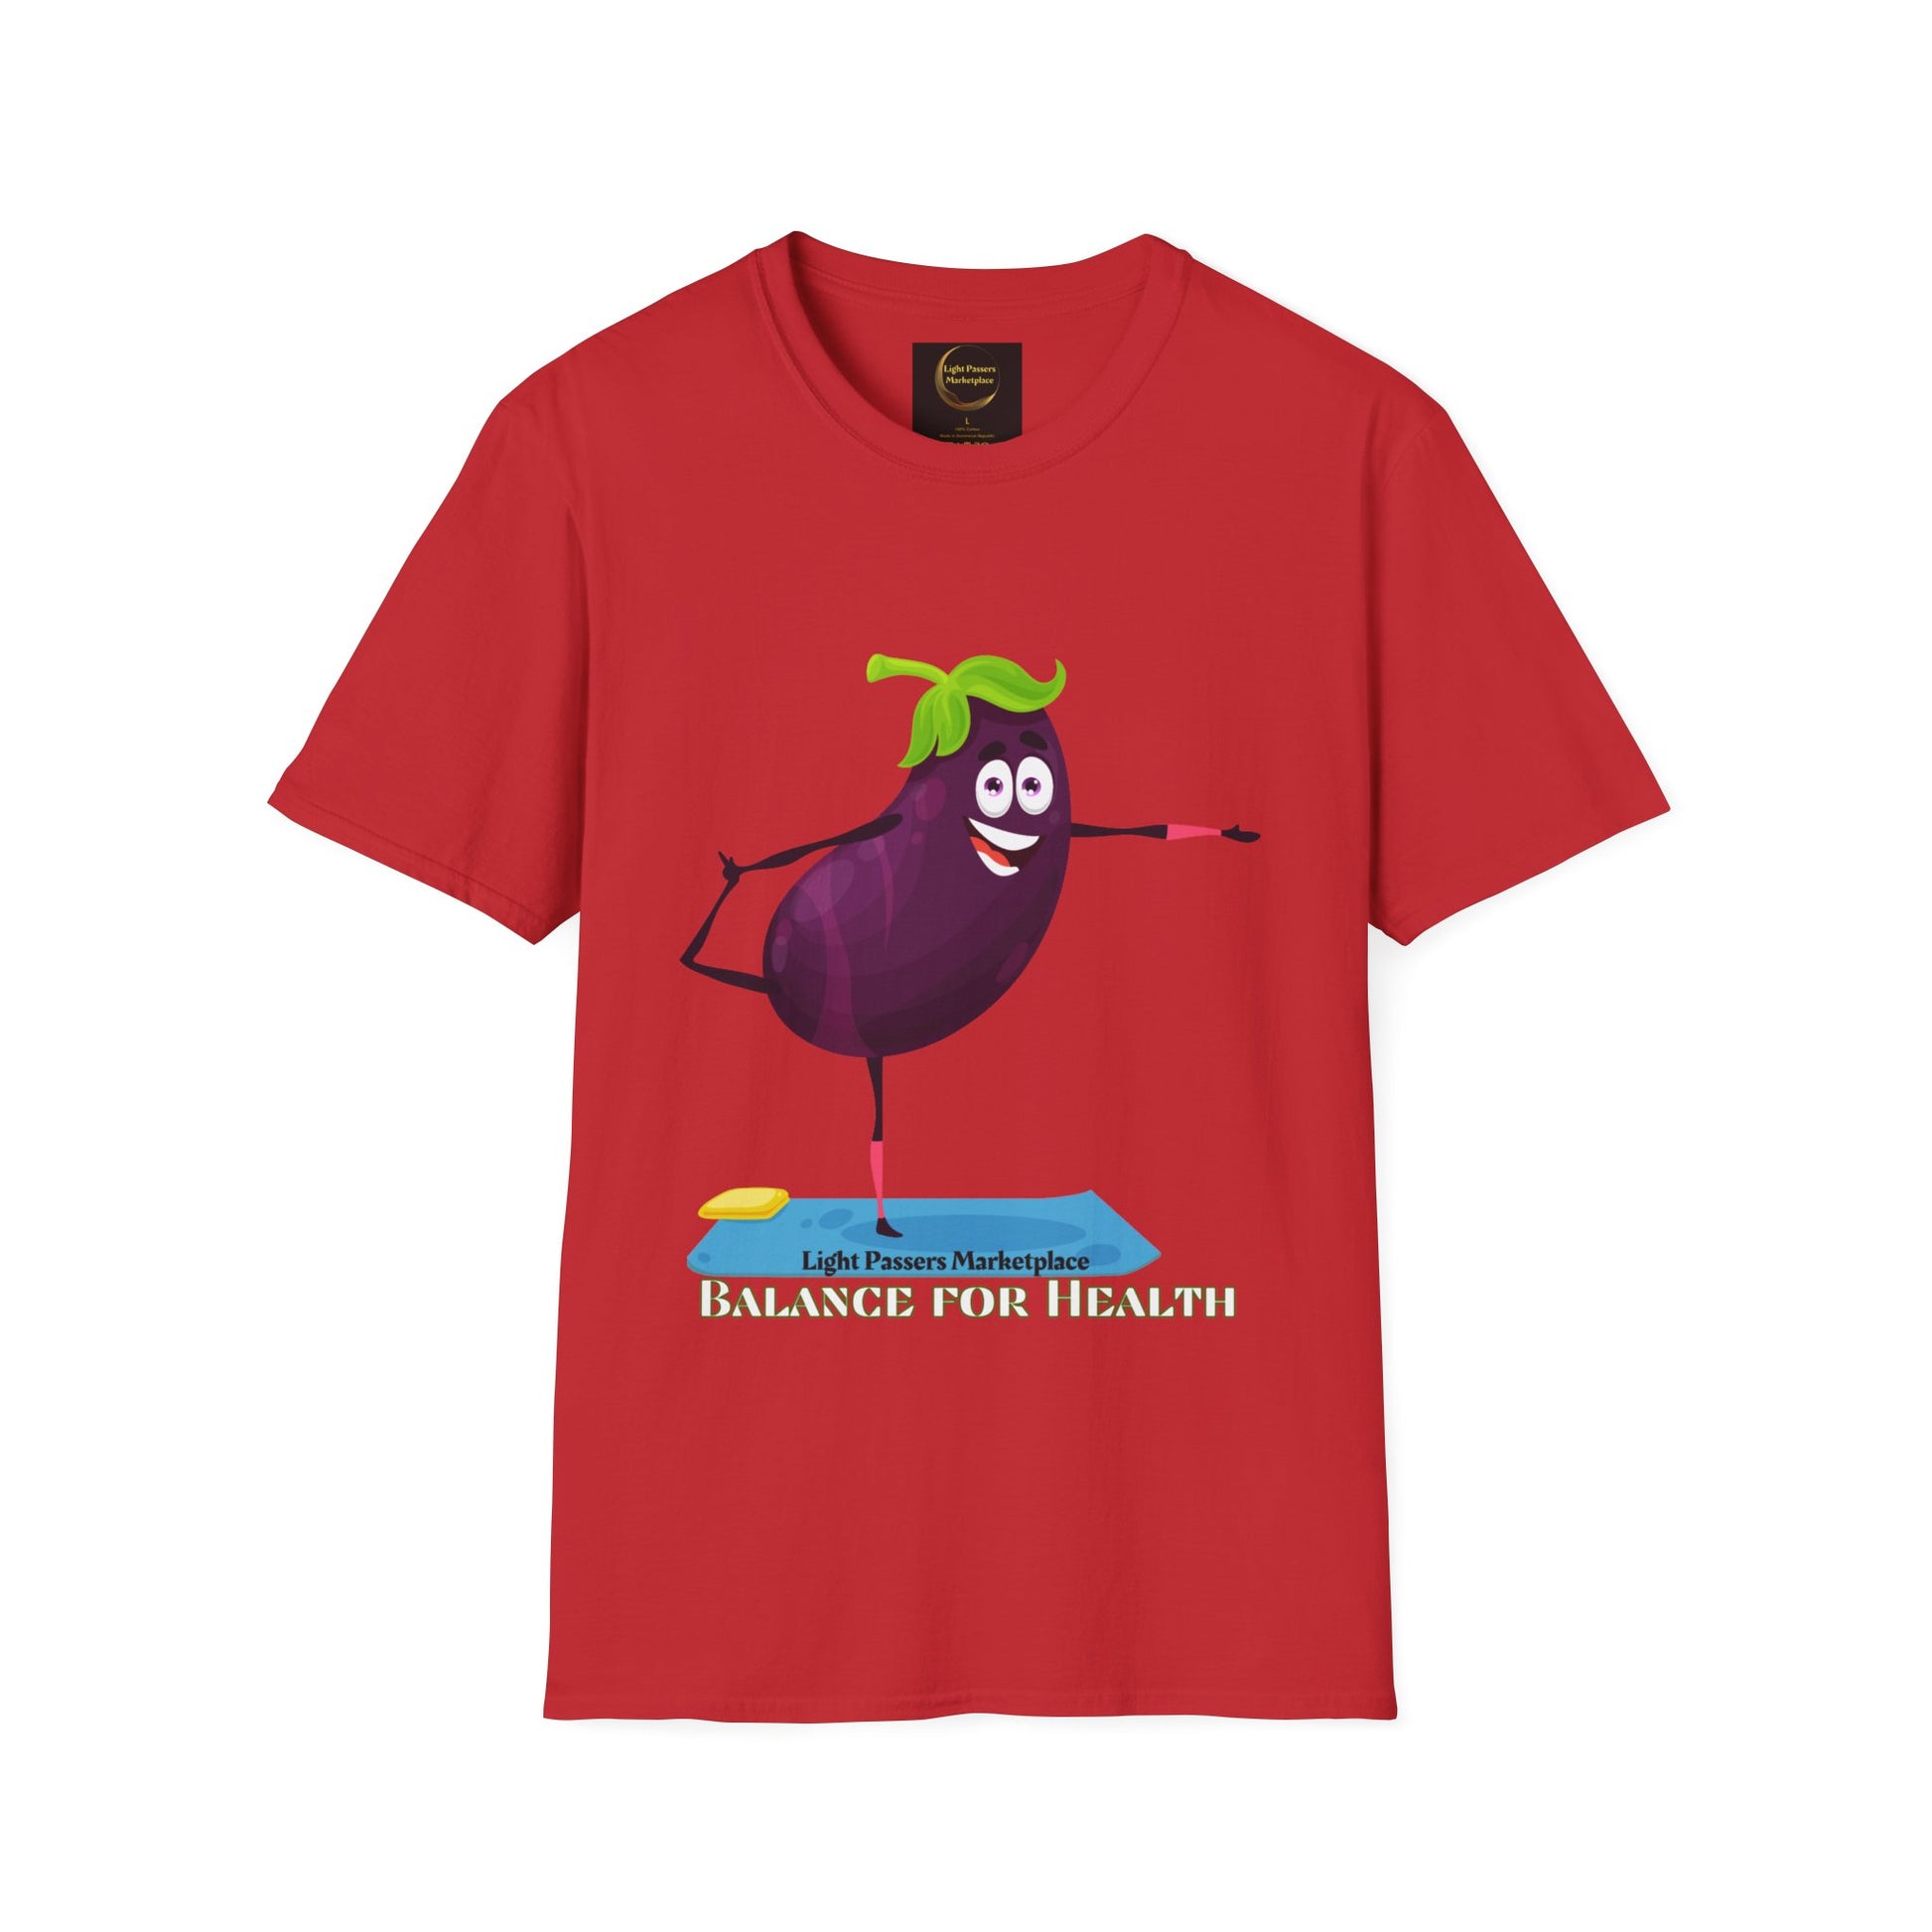 A red unisex t-shirt featuring a cartoon eggplant design. Made of soft 100% ring-spun cotton, with twill tape shoulders and a ribbed collar. Ethically produced by Gildan.